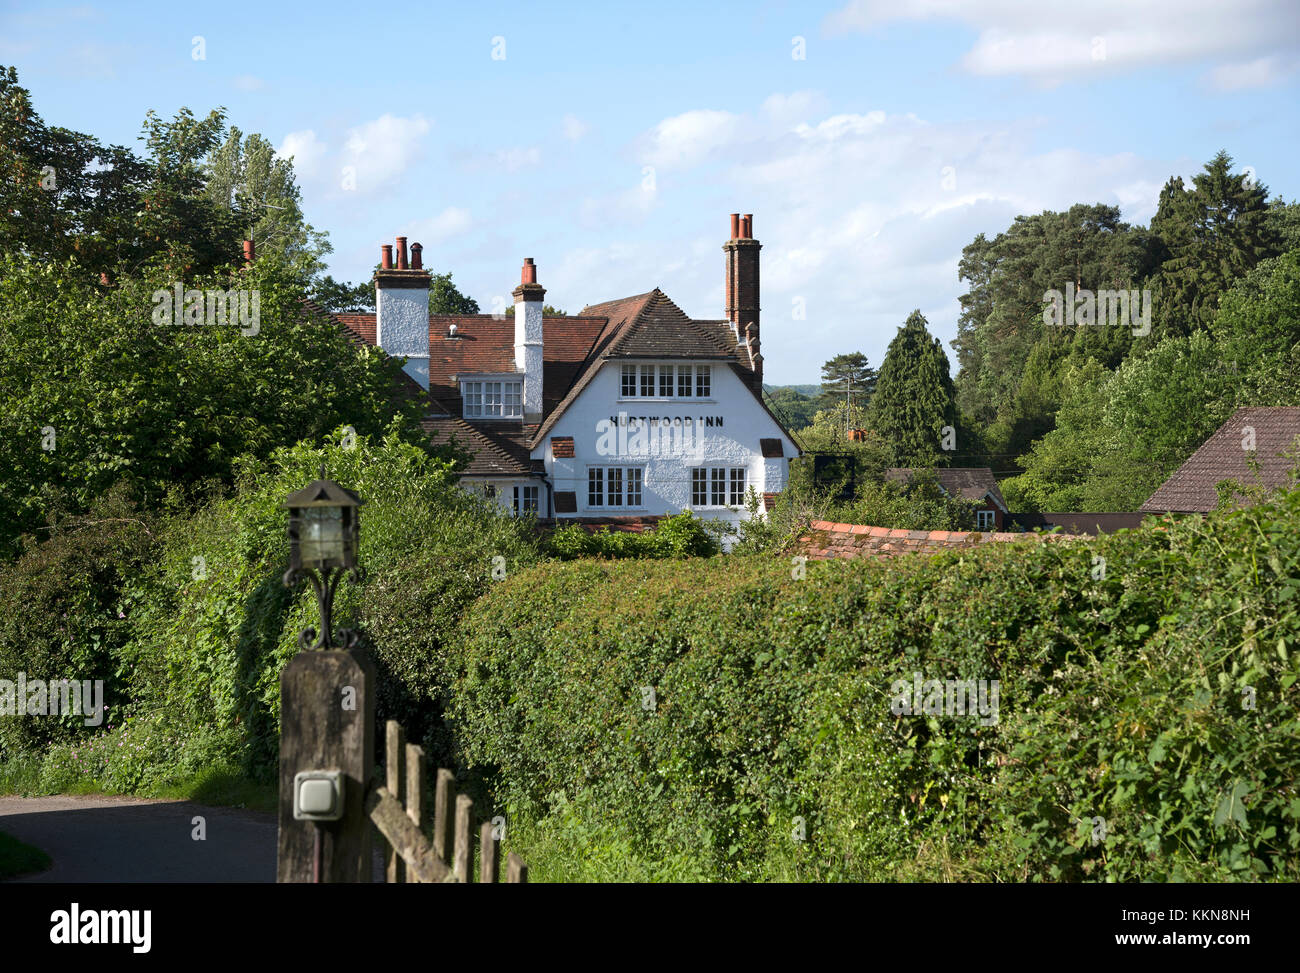 View of the Hurtwood Inn in Peaslake in Surrey, England Stock Photo